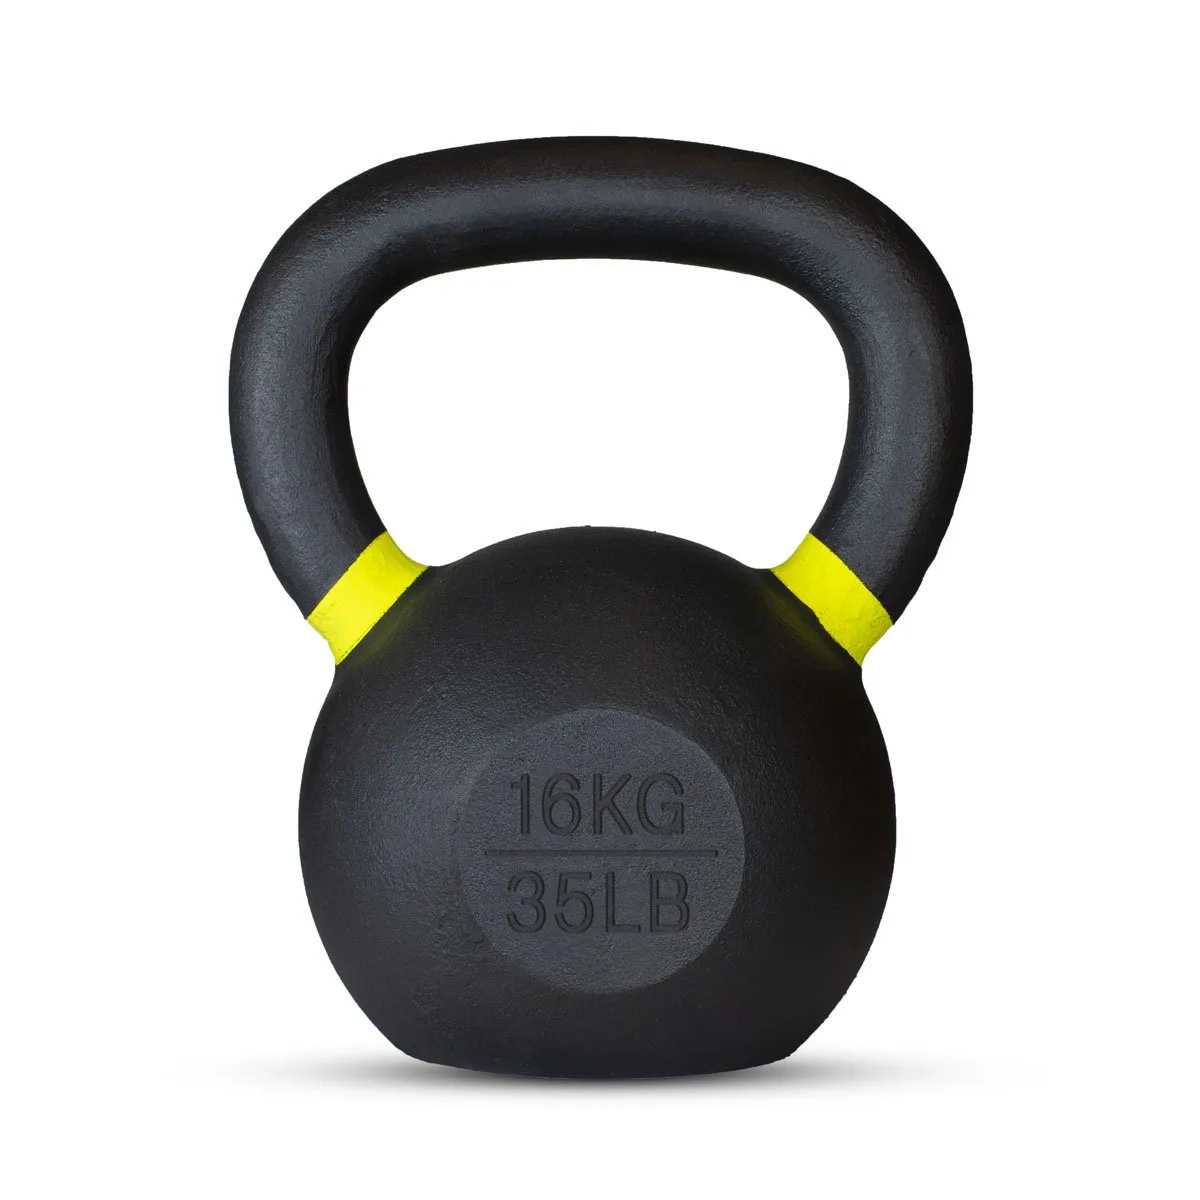 20 KG Competition Kettlebell - Single Piece Casting - KG Markings - Full  Body Workout